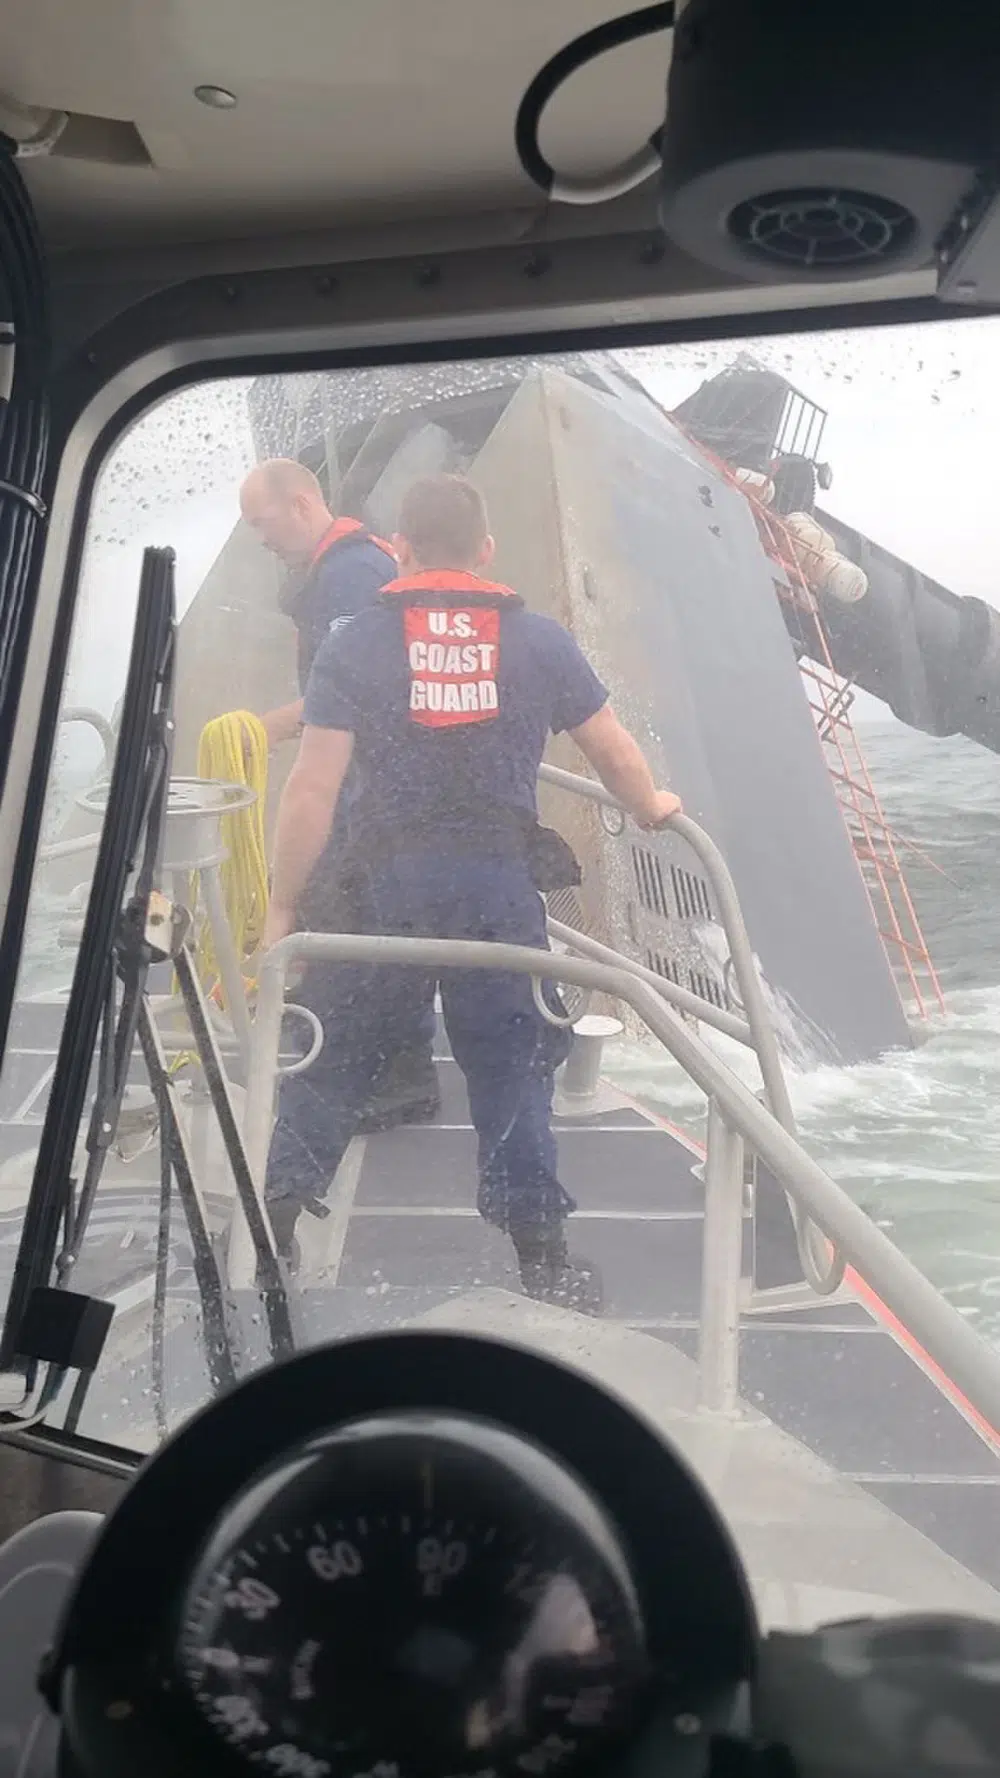 Four Seacor Power crew members found, the search continues for 9 other missing crew members